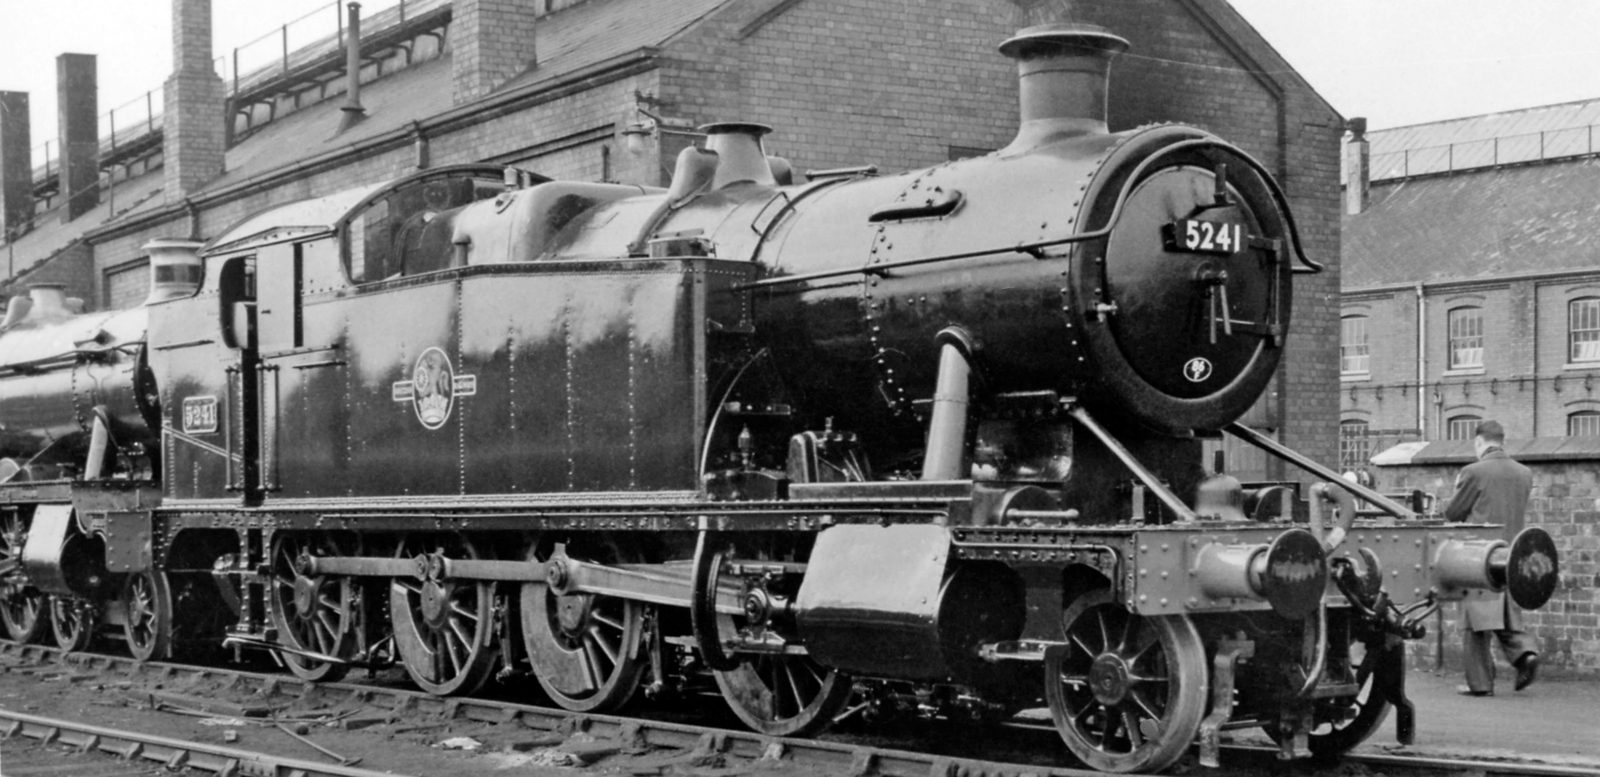 No. 5241 in February 1962 at the Swindon works